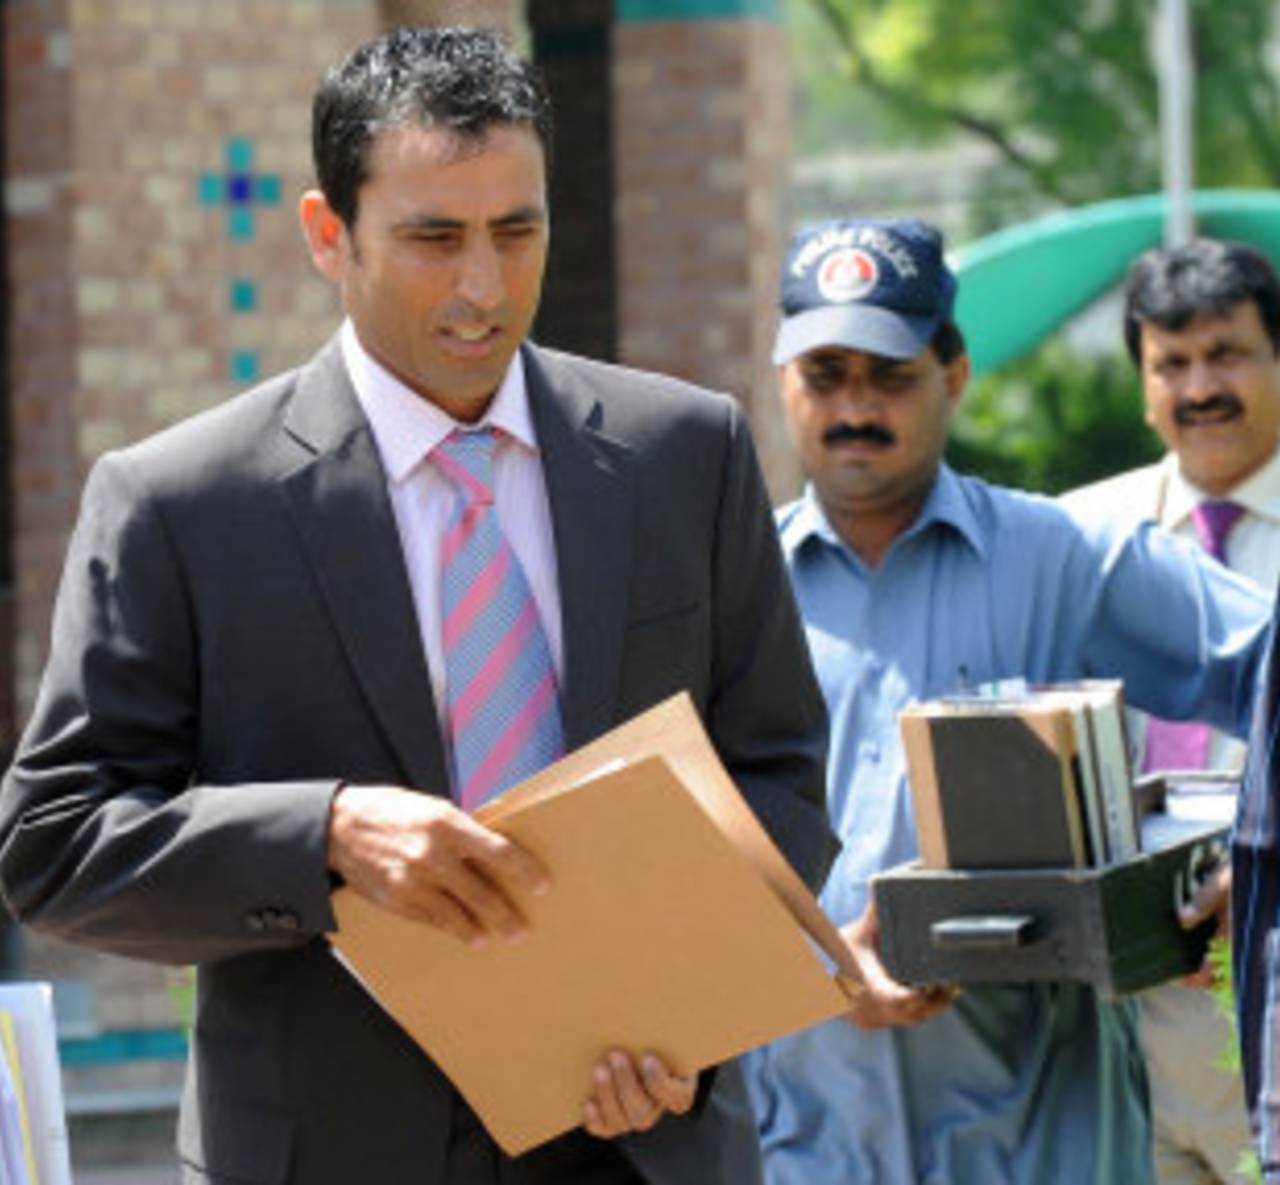 Younis Khan's lawyer has said that neither he nor Younis have received any notice from the PCB&nbsp;&nbsp;&bull;&nbsp;&nbsp;AFP